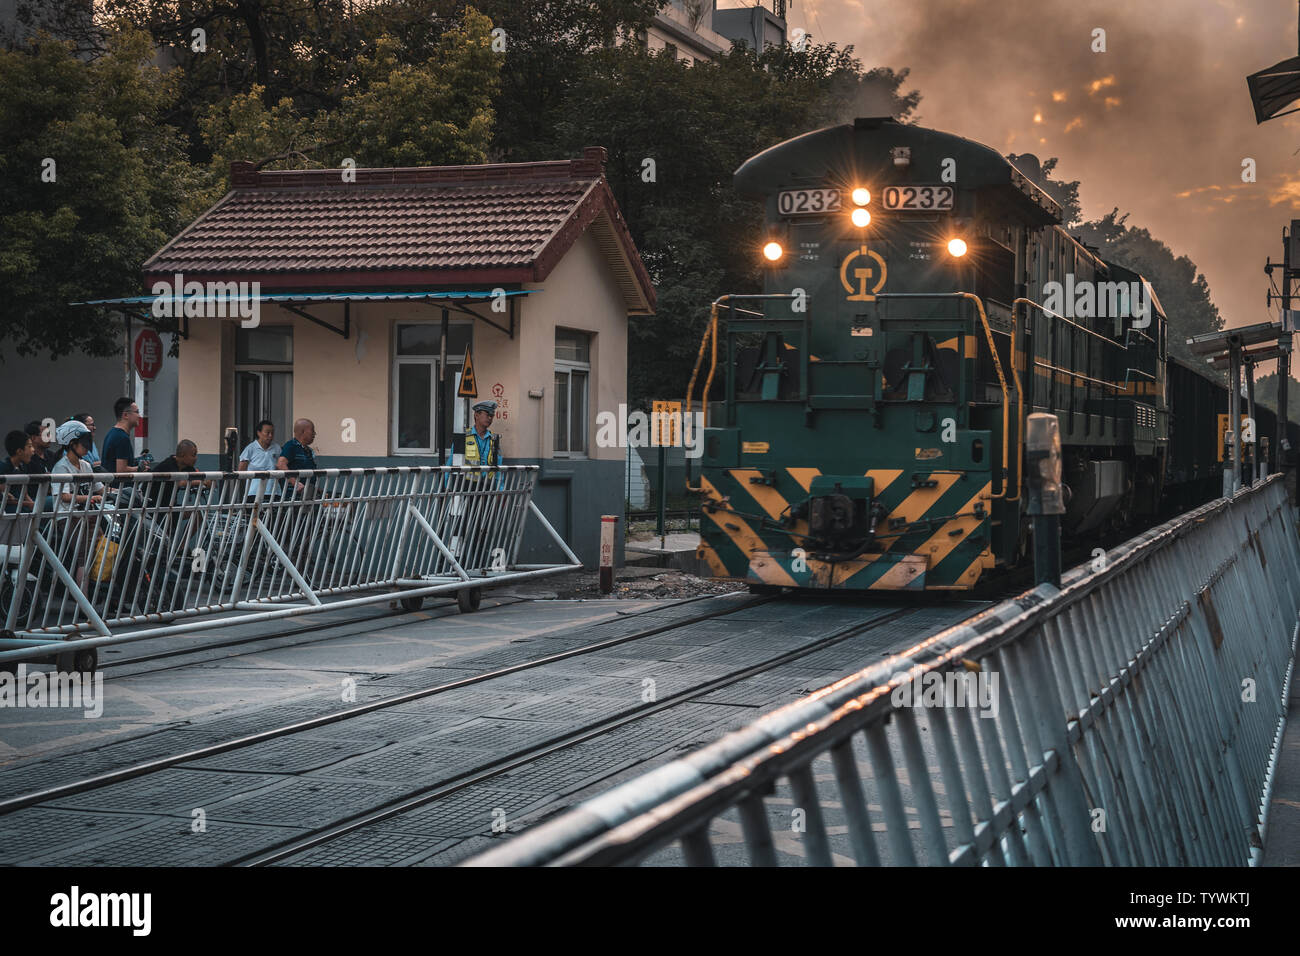 A freight railway outside Nanjing. In the evening, people on the street waited for a train to pass. Stock Photo